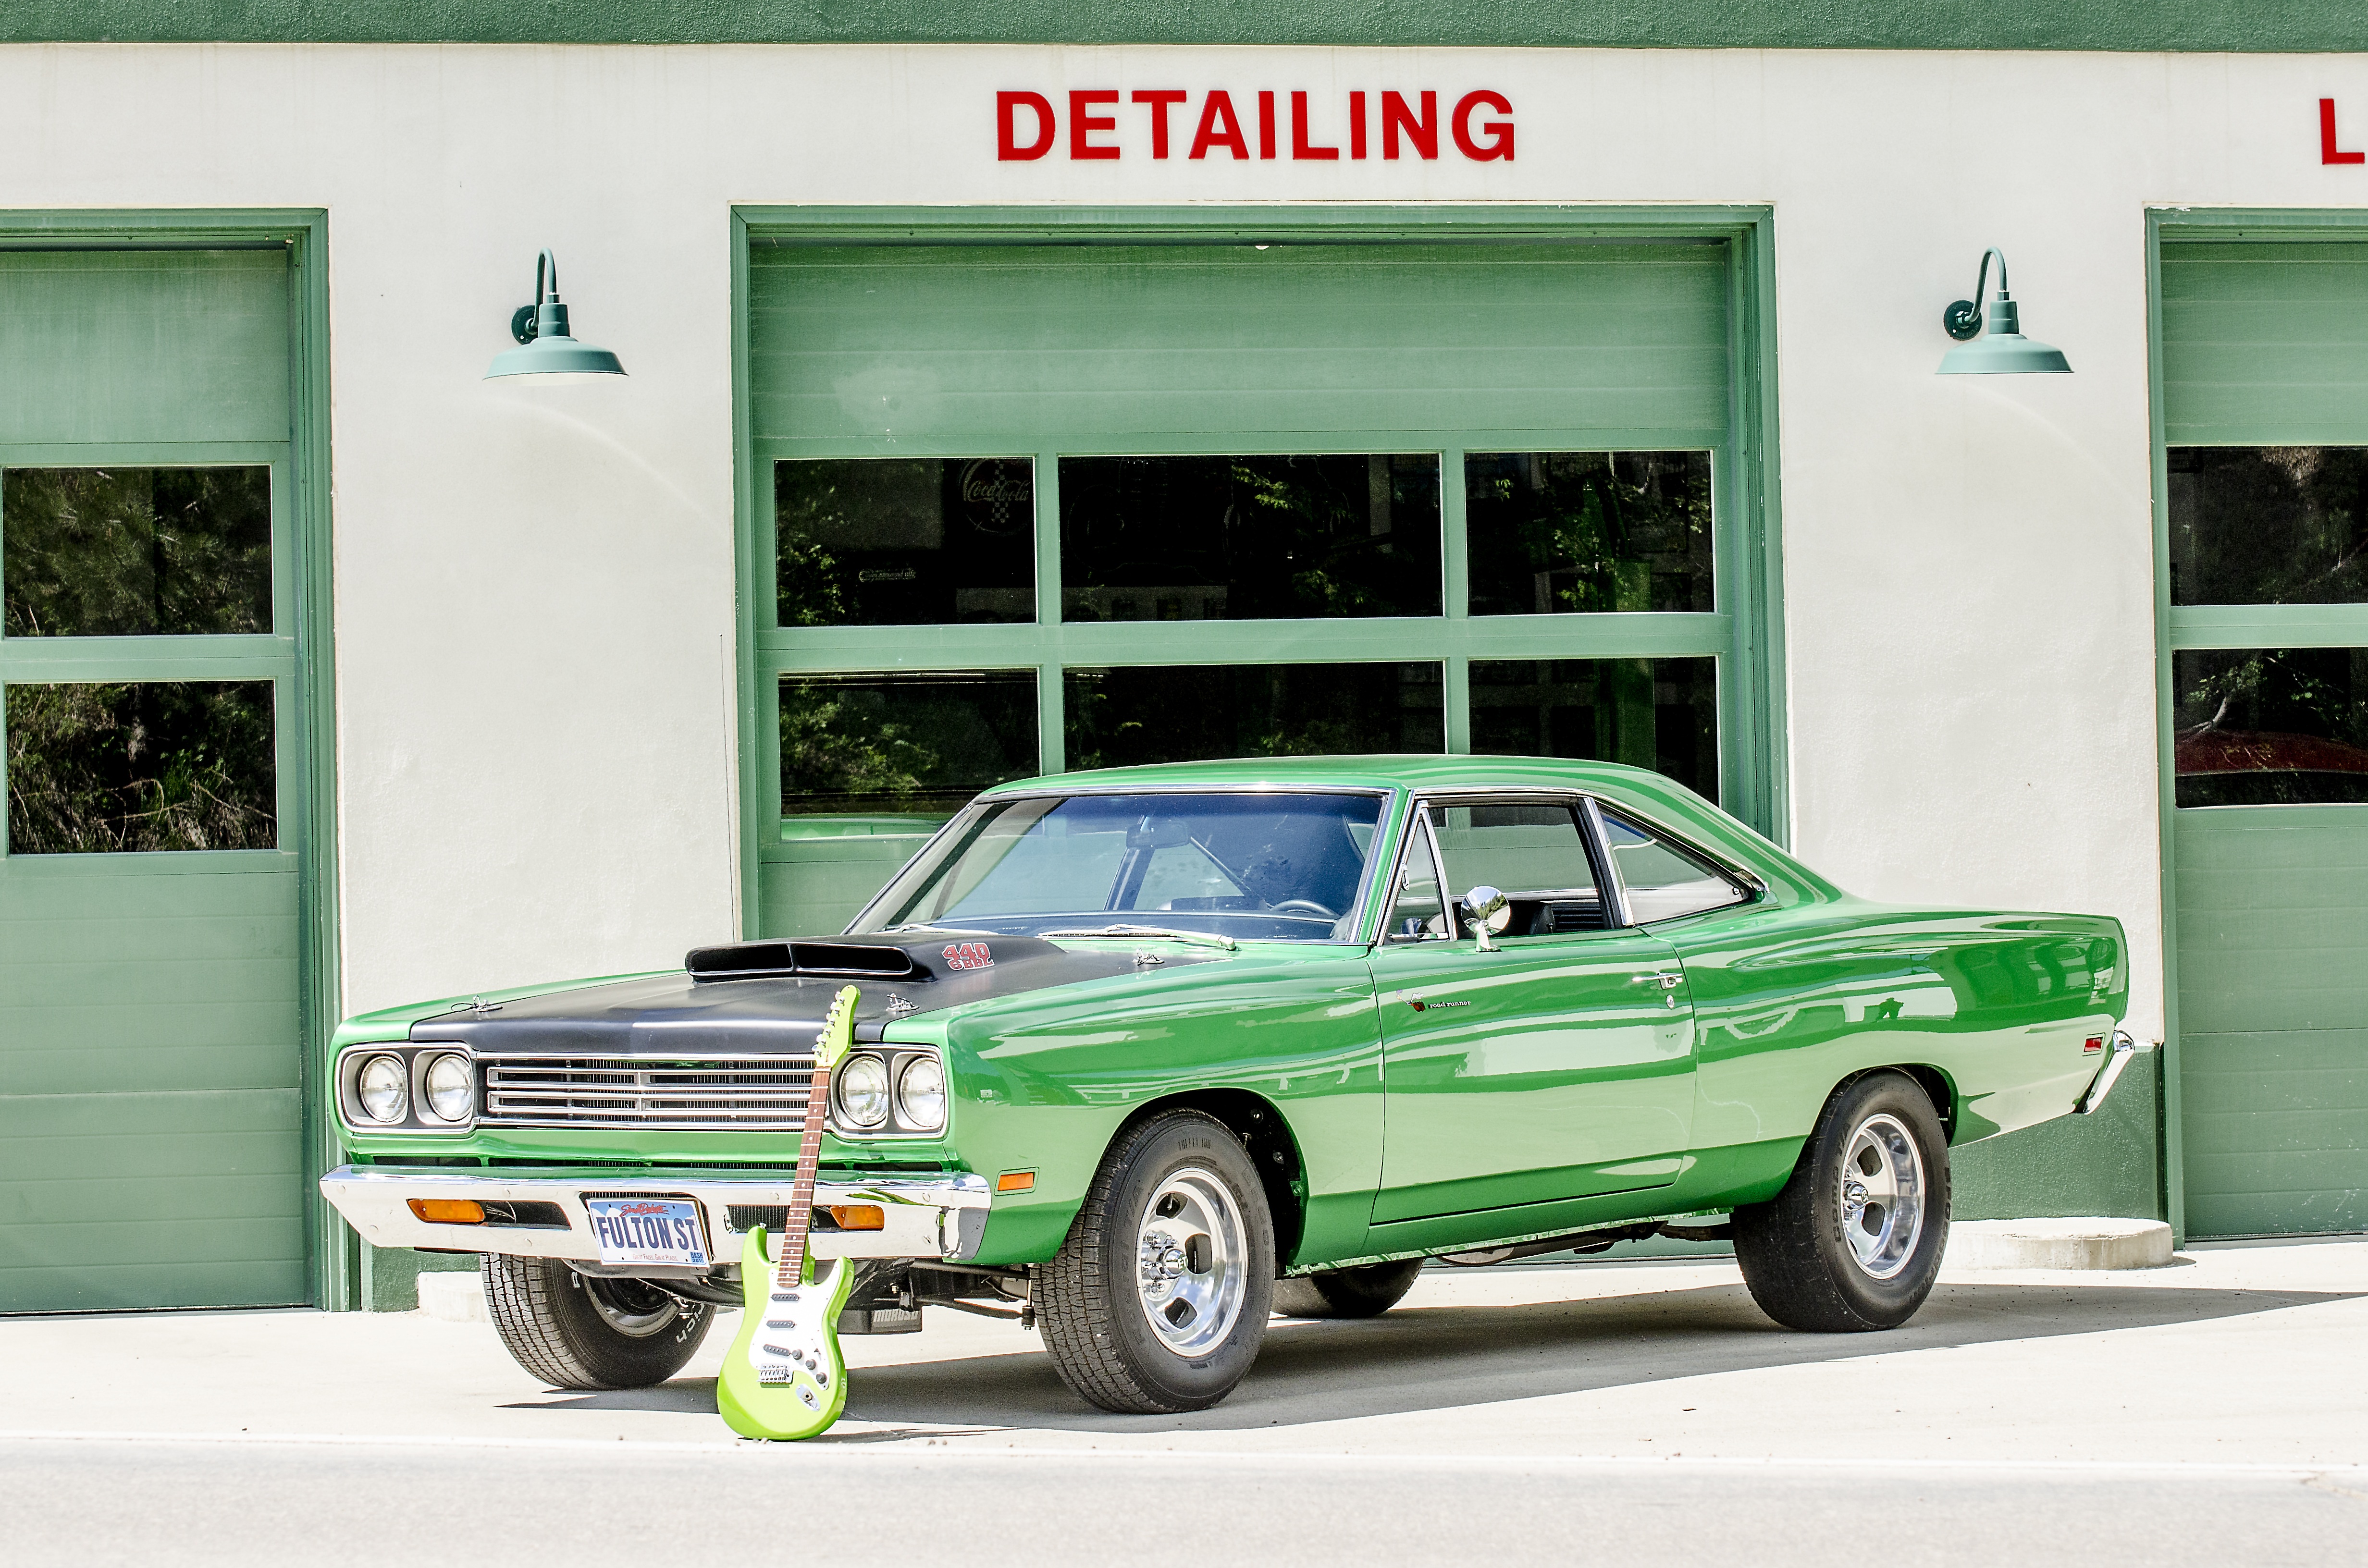 vintage car, retro, guitar, vehicles, plymouth road runner, green car, hot rod, muscle car, plymouth